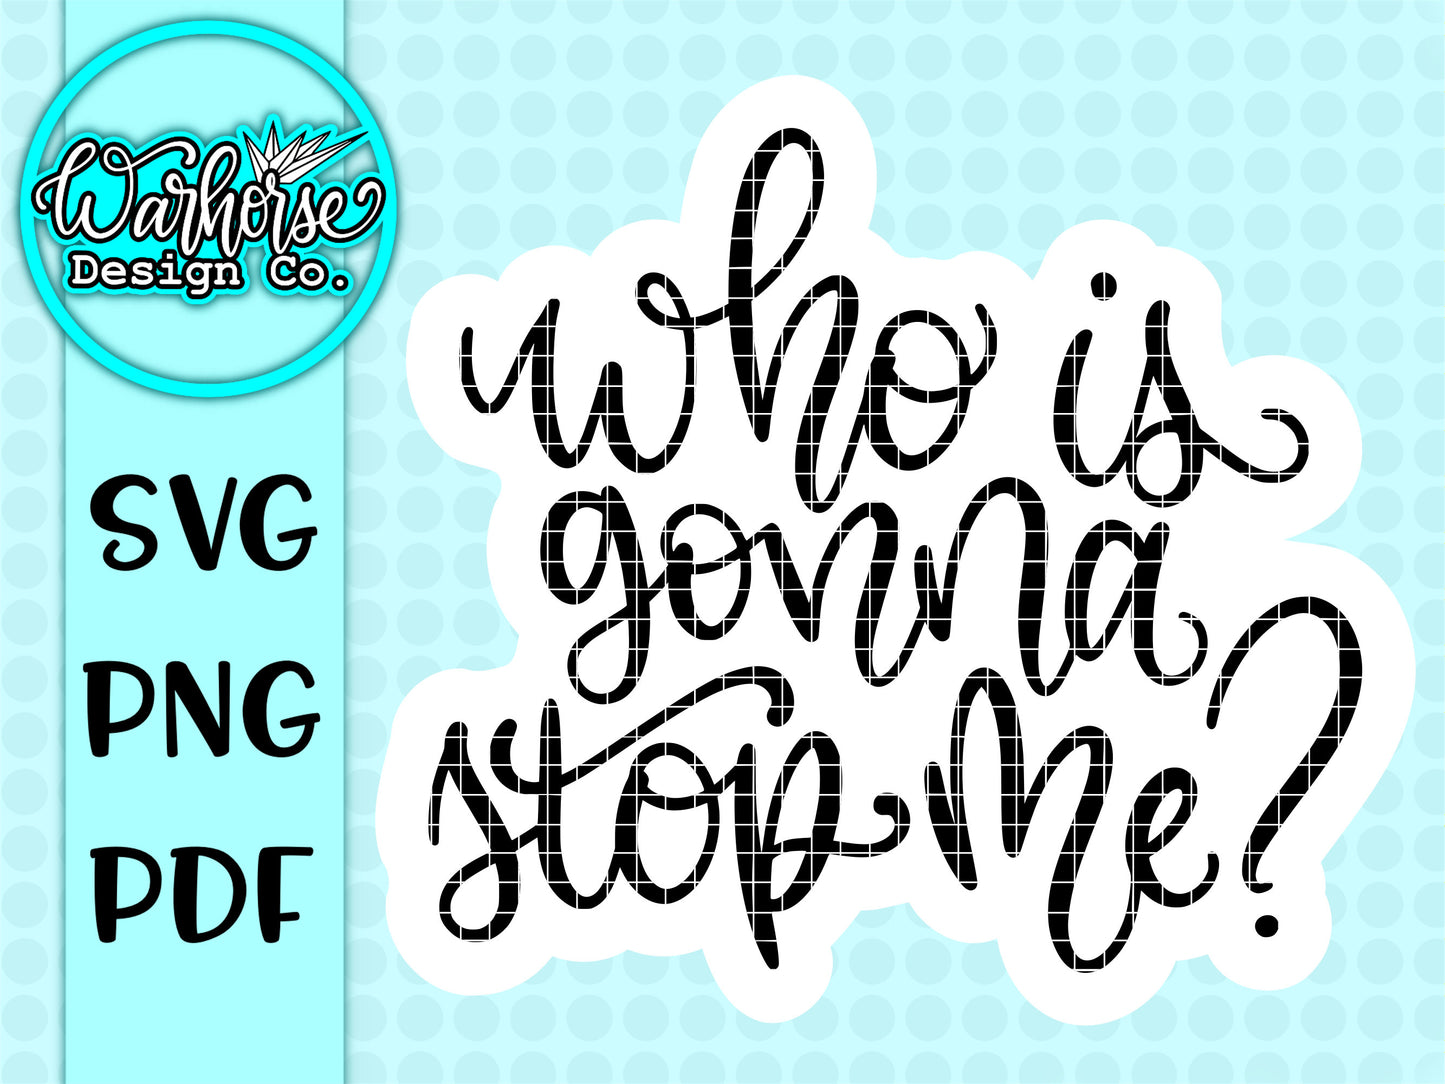 Who is gonna stop me SVG PNG PDF